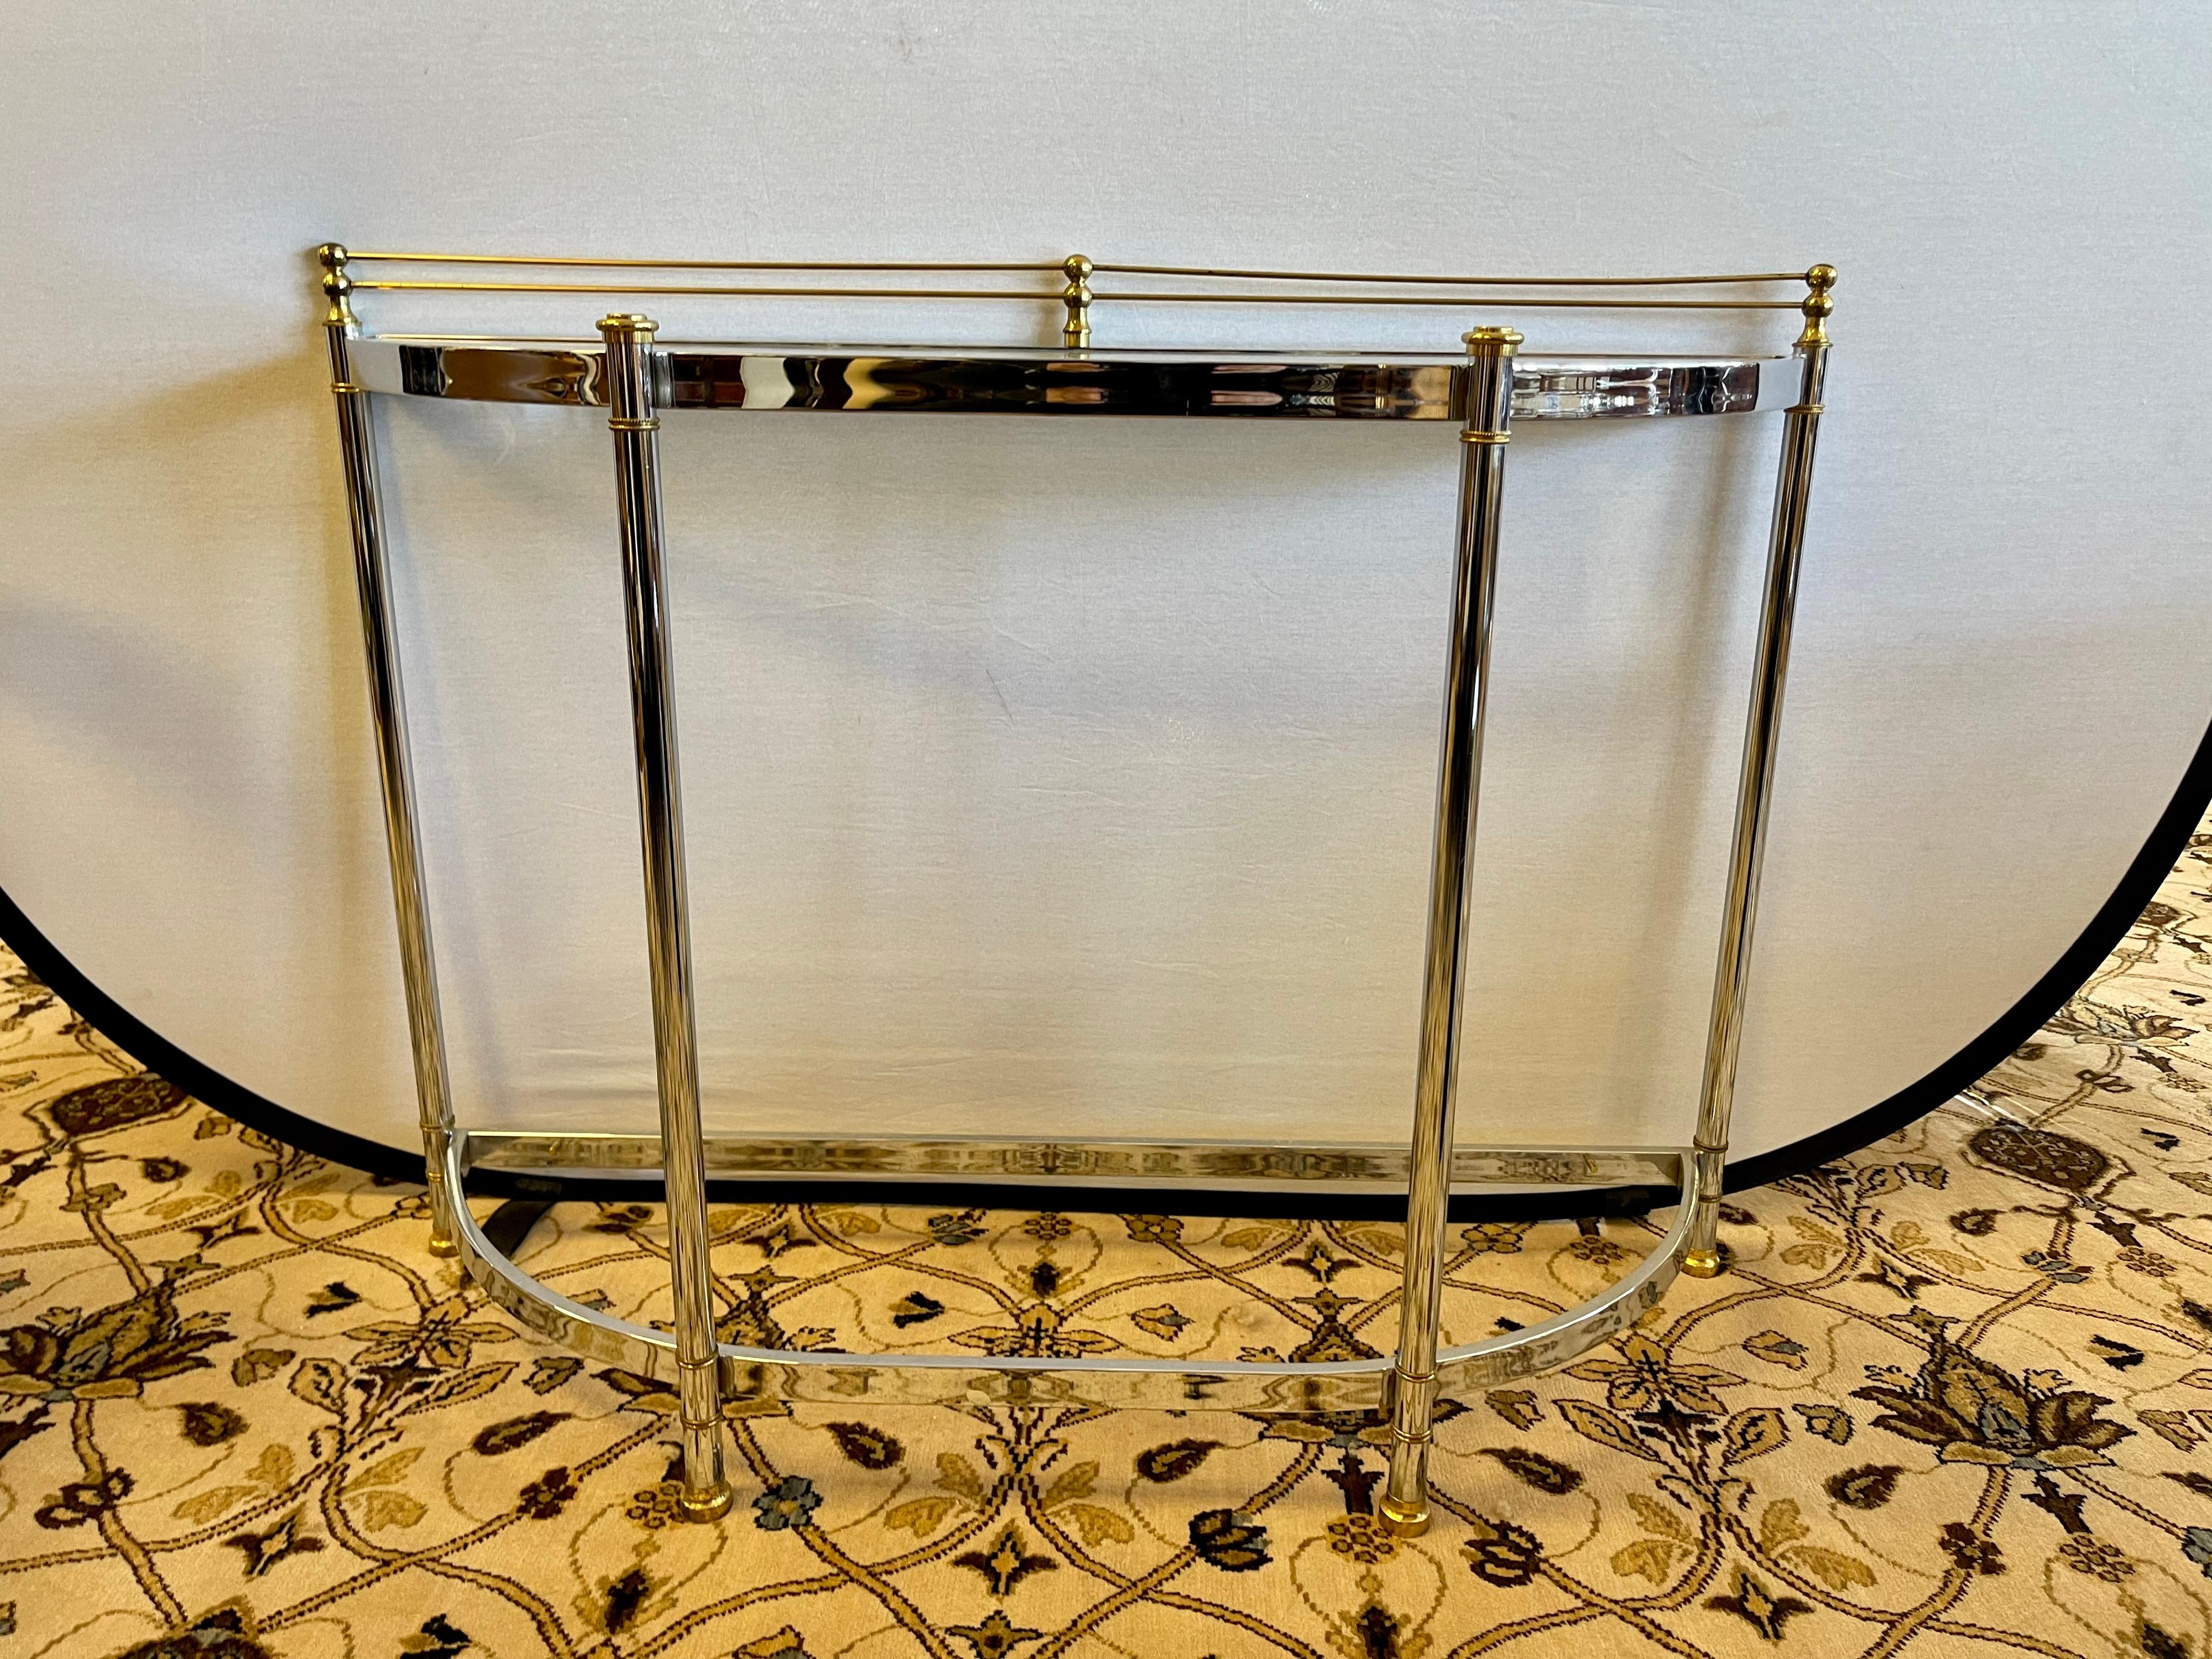 Magnificent Milo Baughman glass top with chrome base demilune table with brass accents.
Sculptural base makes this piece look like a sculpture. Nothing short of gorgeous. Glass top at top but note no glass on bottom. Iconic mid century classic.